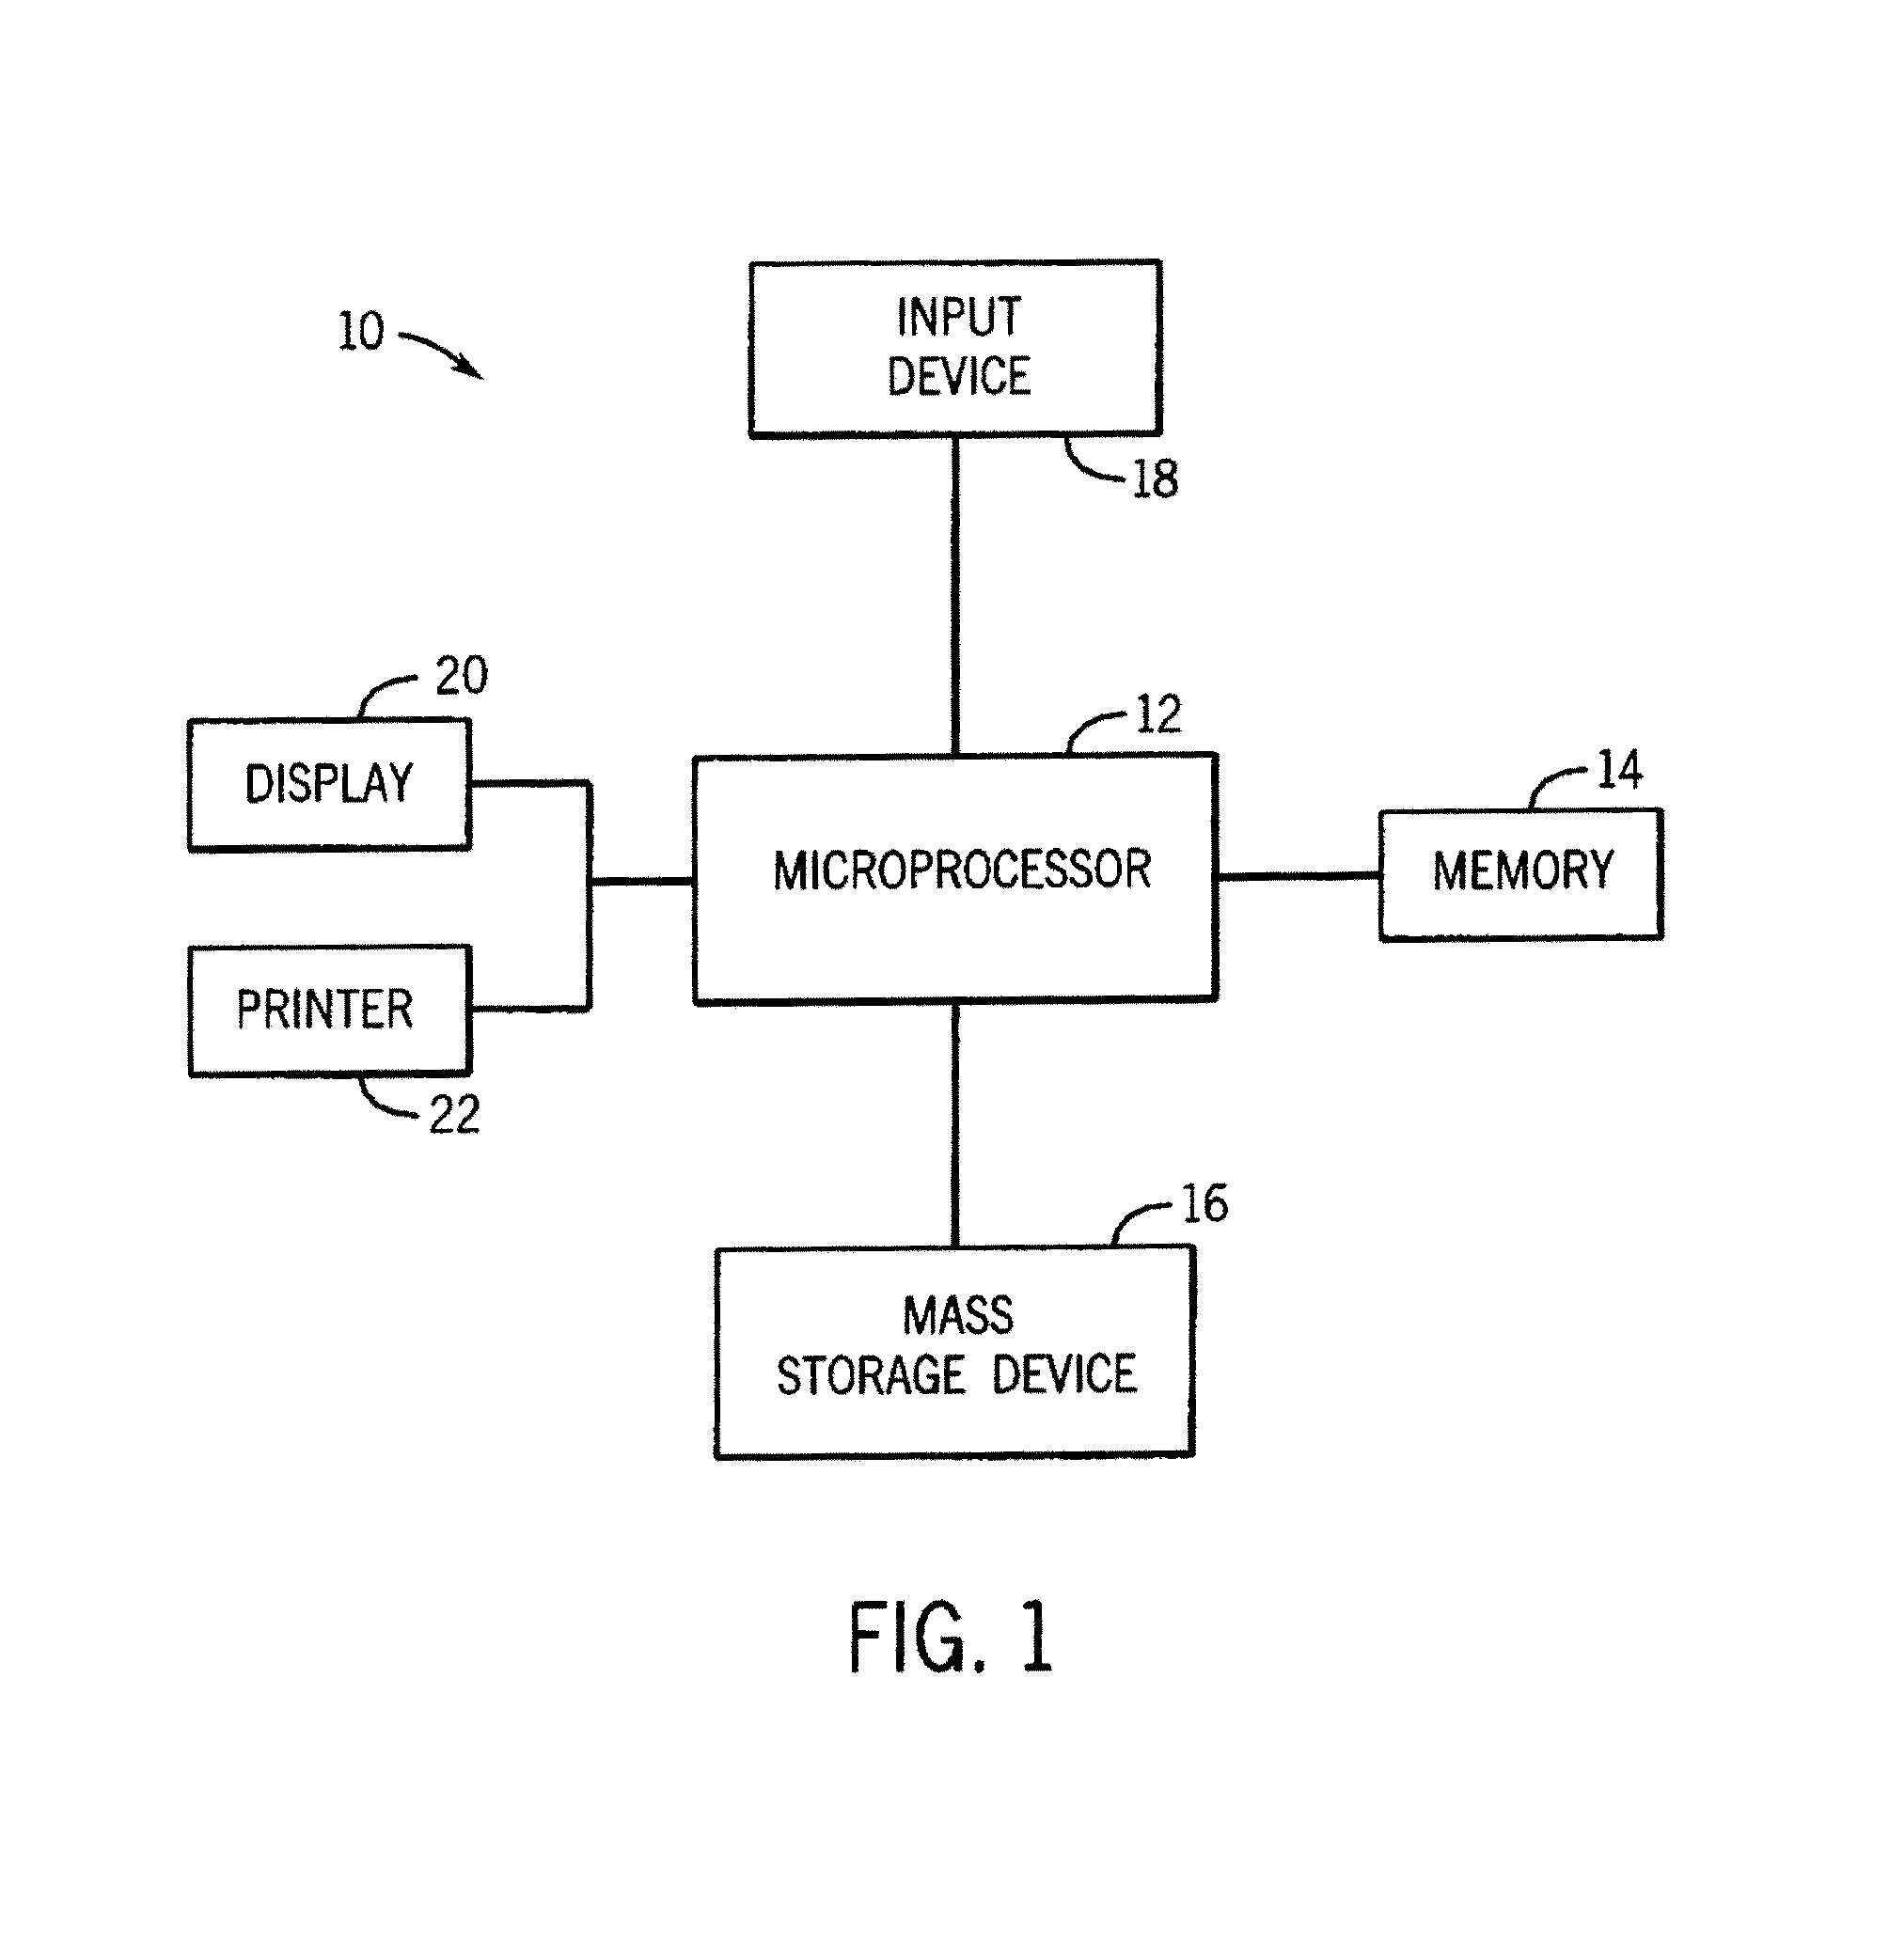 System and method for integrated quantifiable detection, diagnosis and monitoring of disease using patient related time trend data